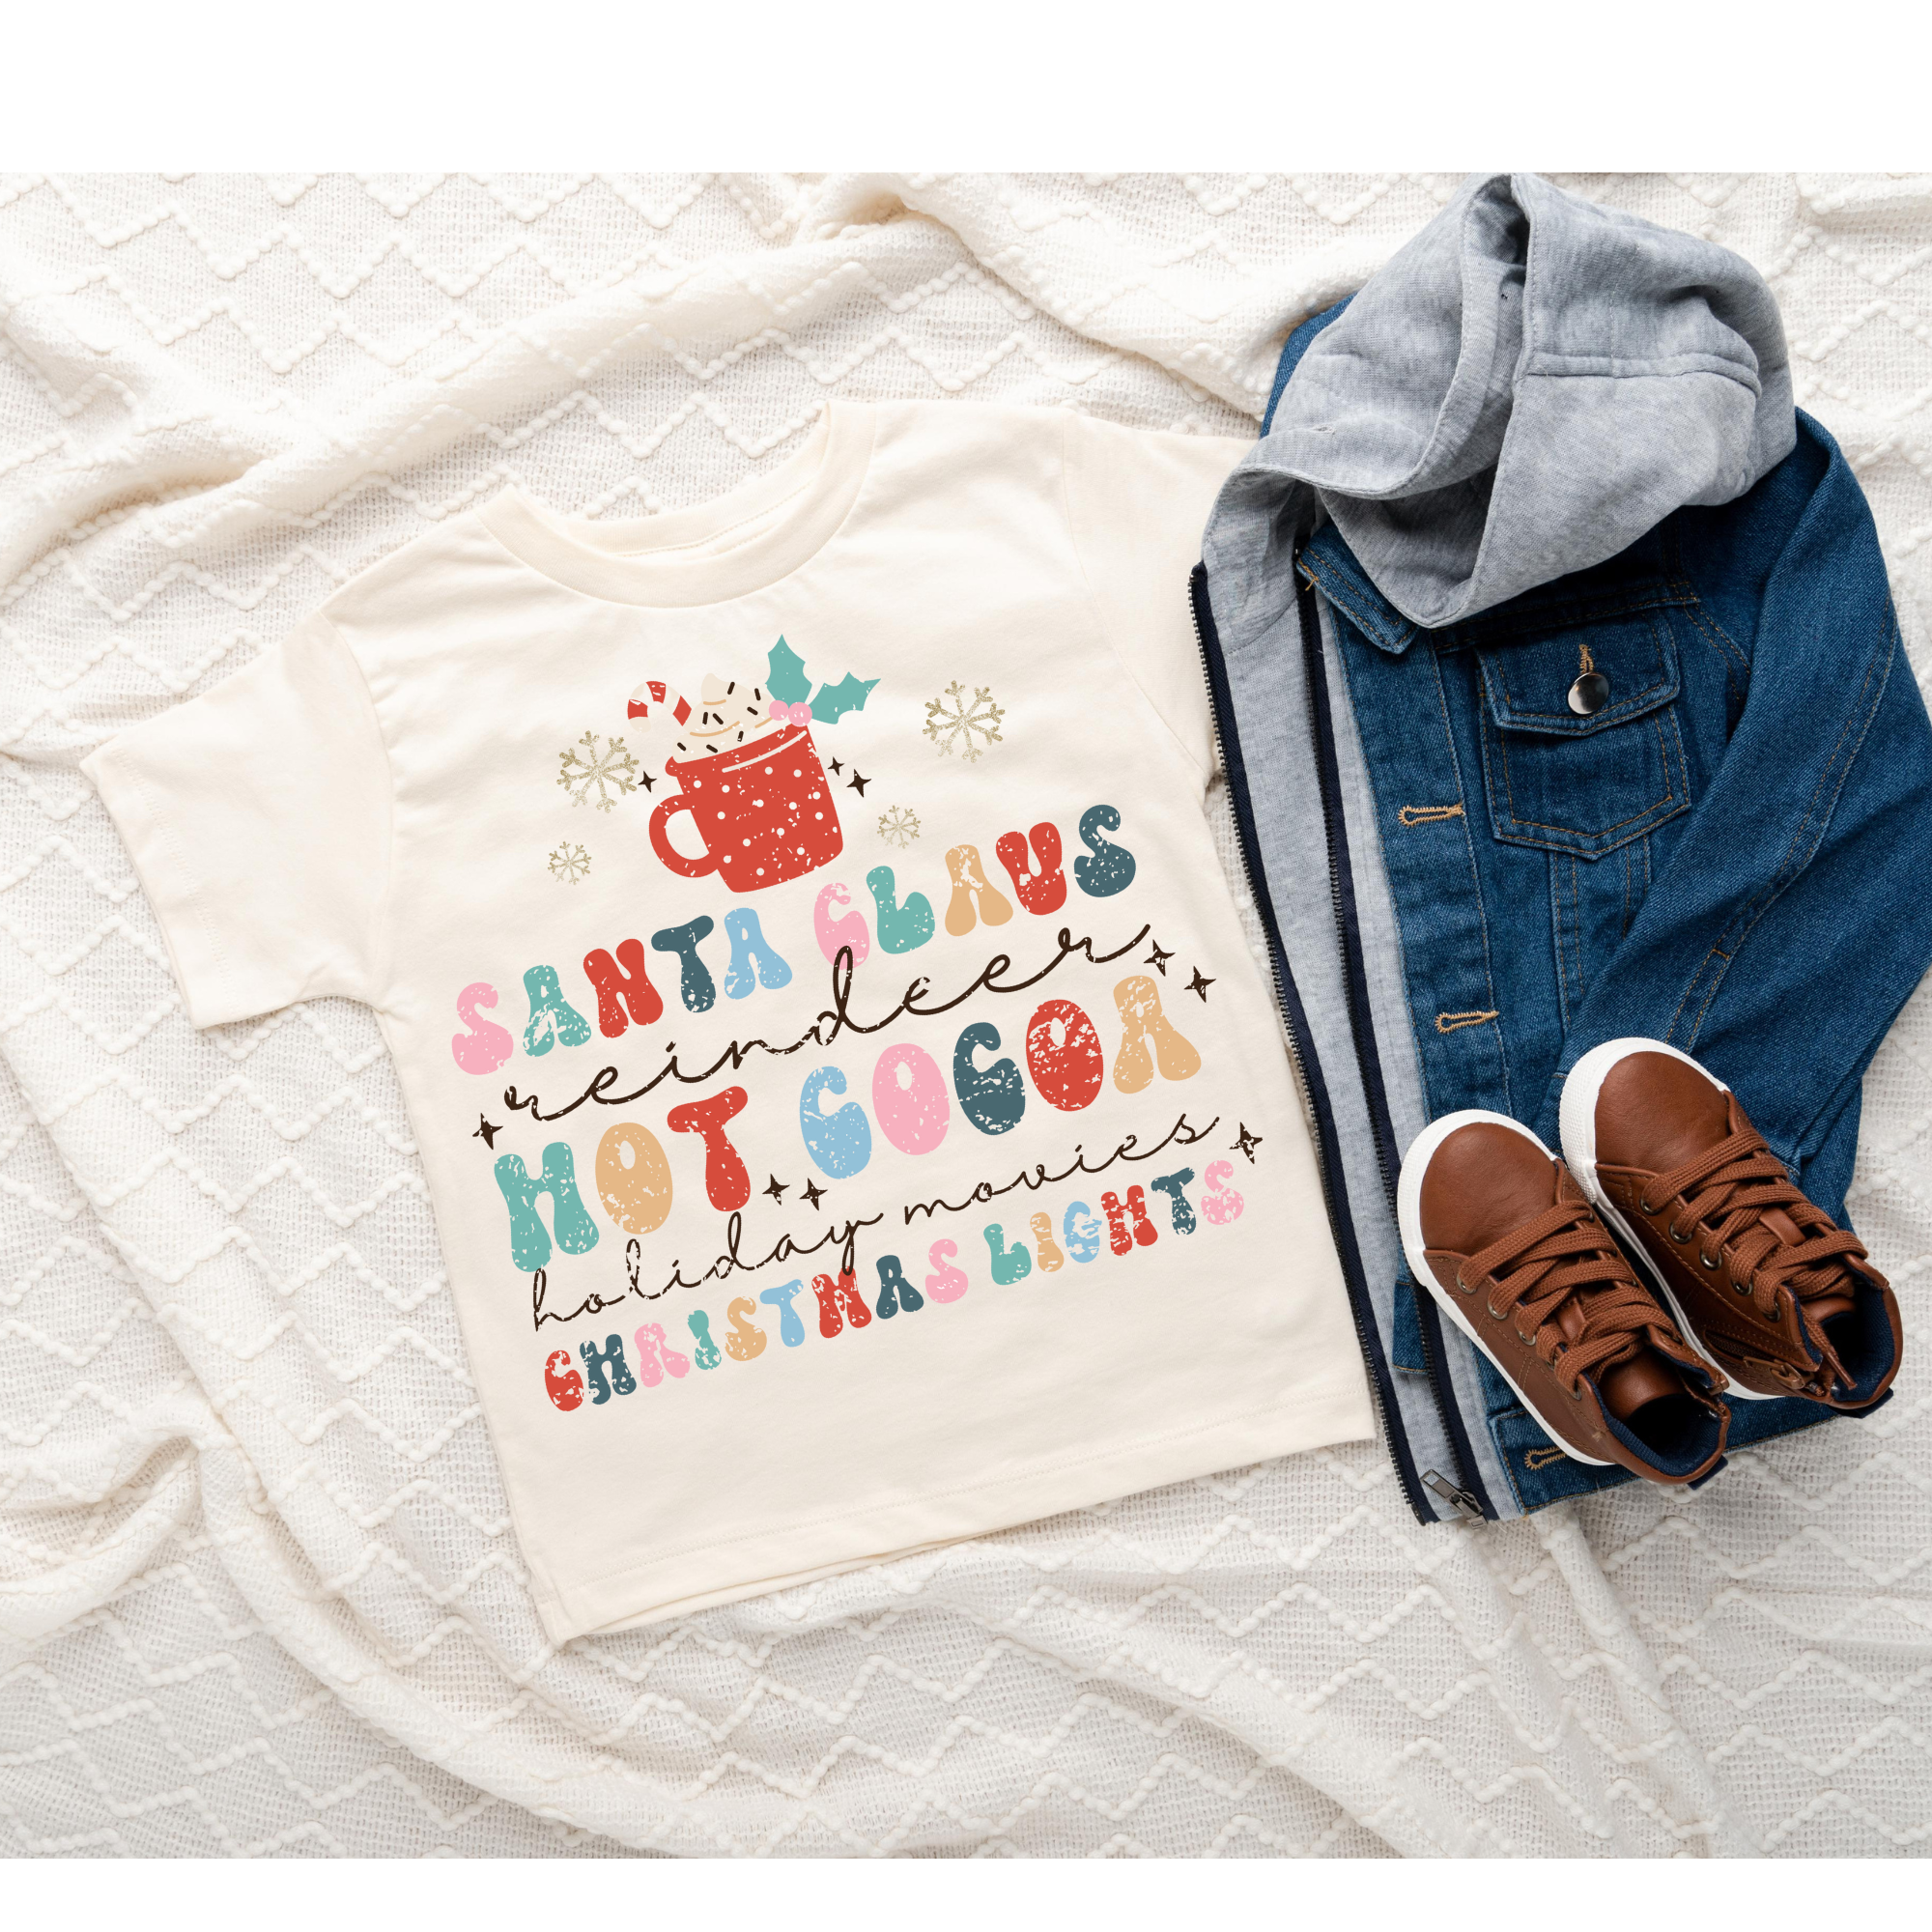 Hot Cocoa, Santa Clause, Movies, Etc. | Kid's Graphic Tee